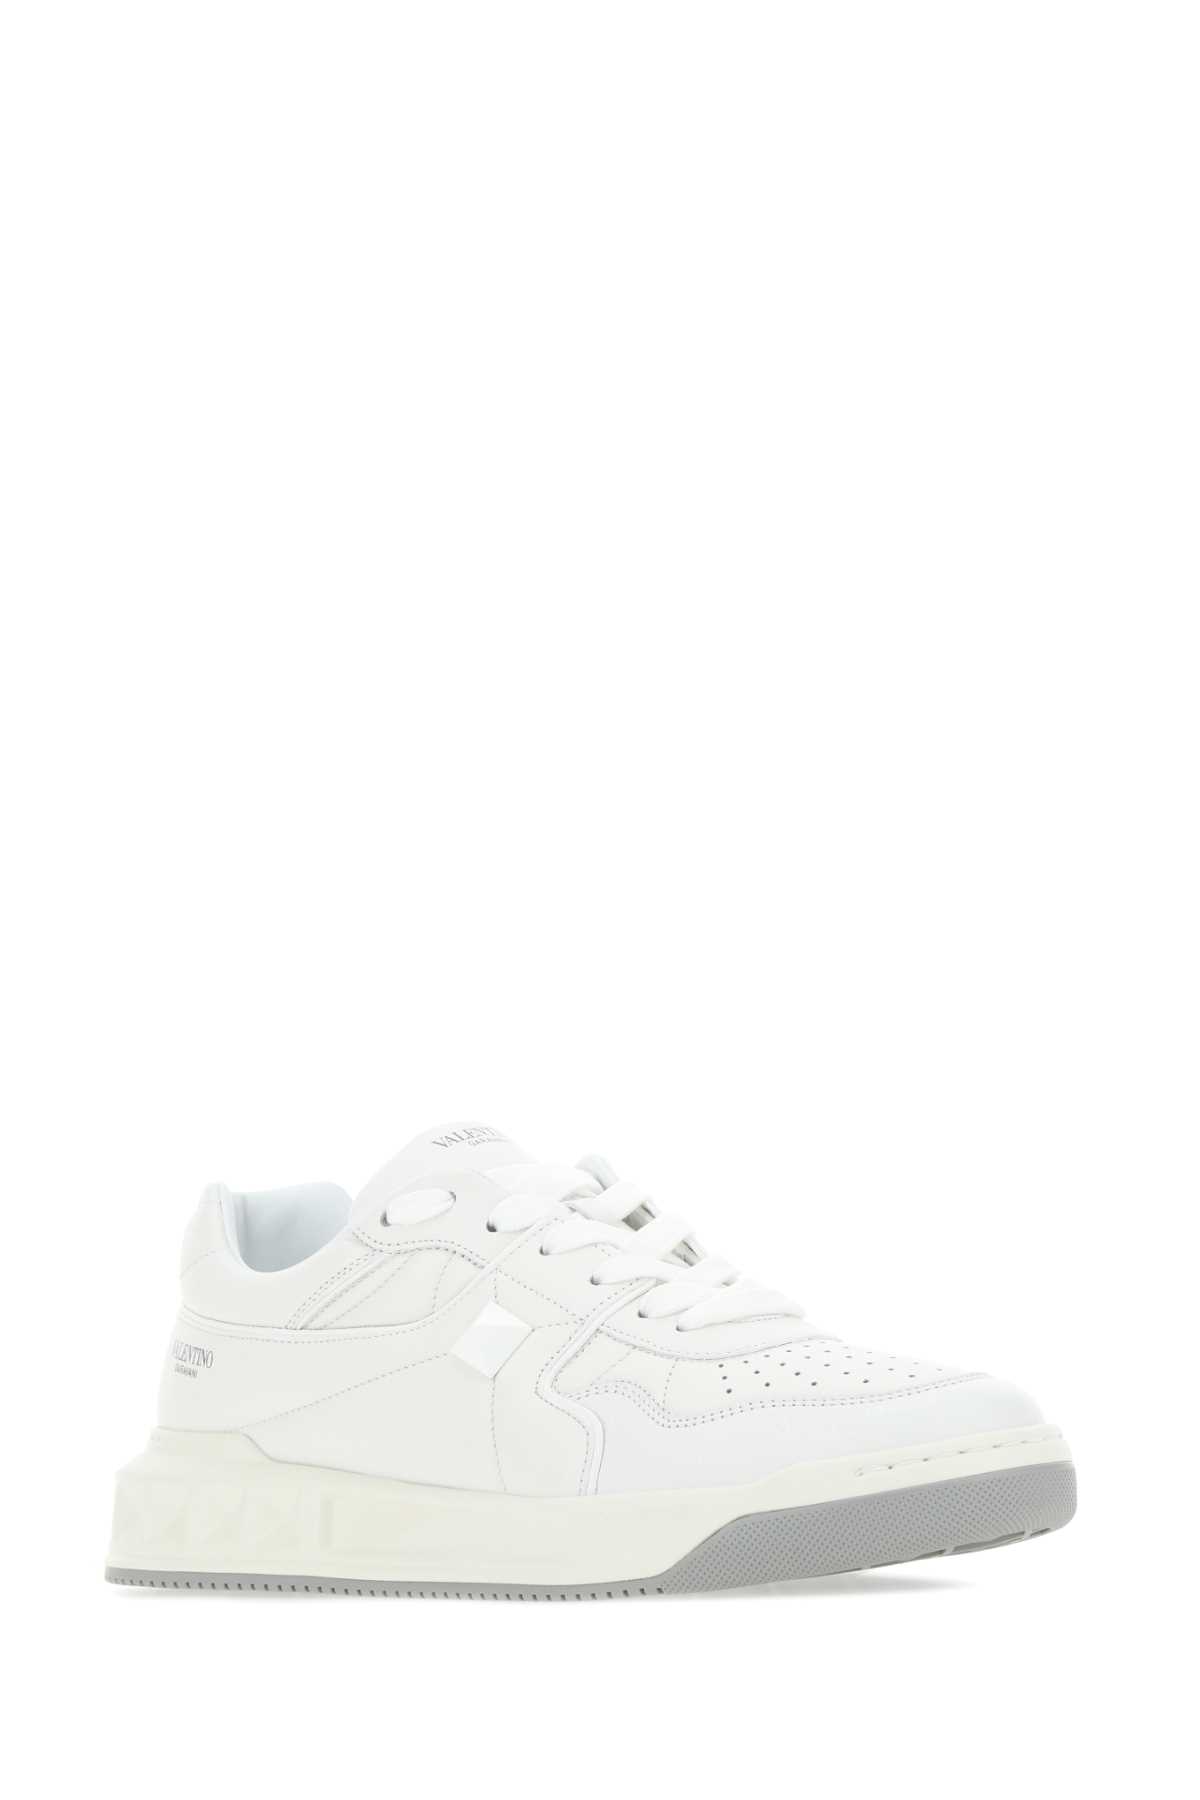 Shop Valentino White Nappa Leather One Stud Sneakers